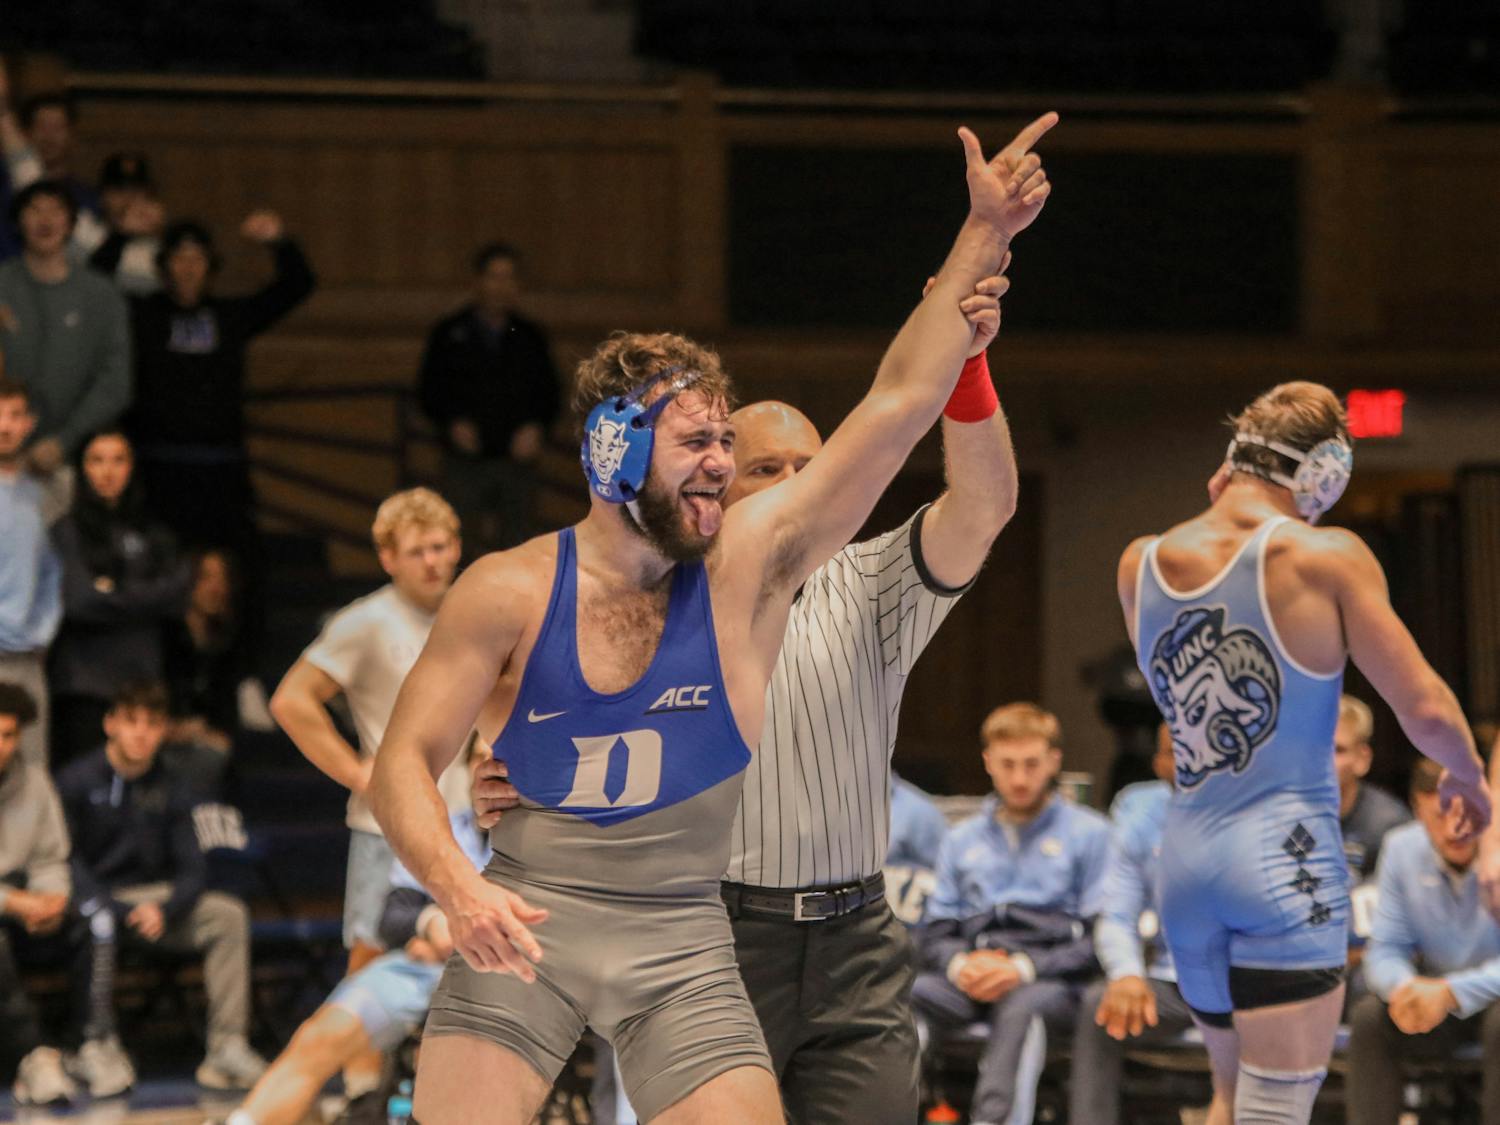 Vincent Baker celebrates a win at 197 pounds against North Carolina's Max Shaw.